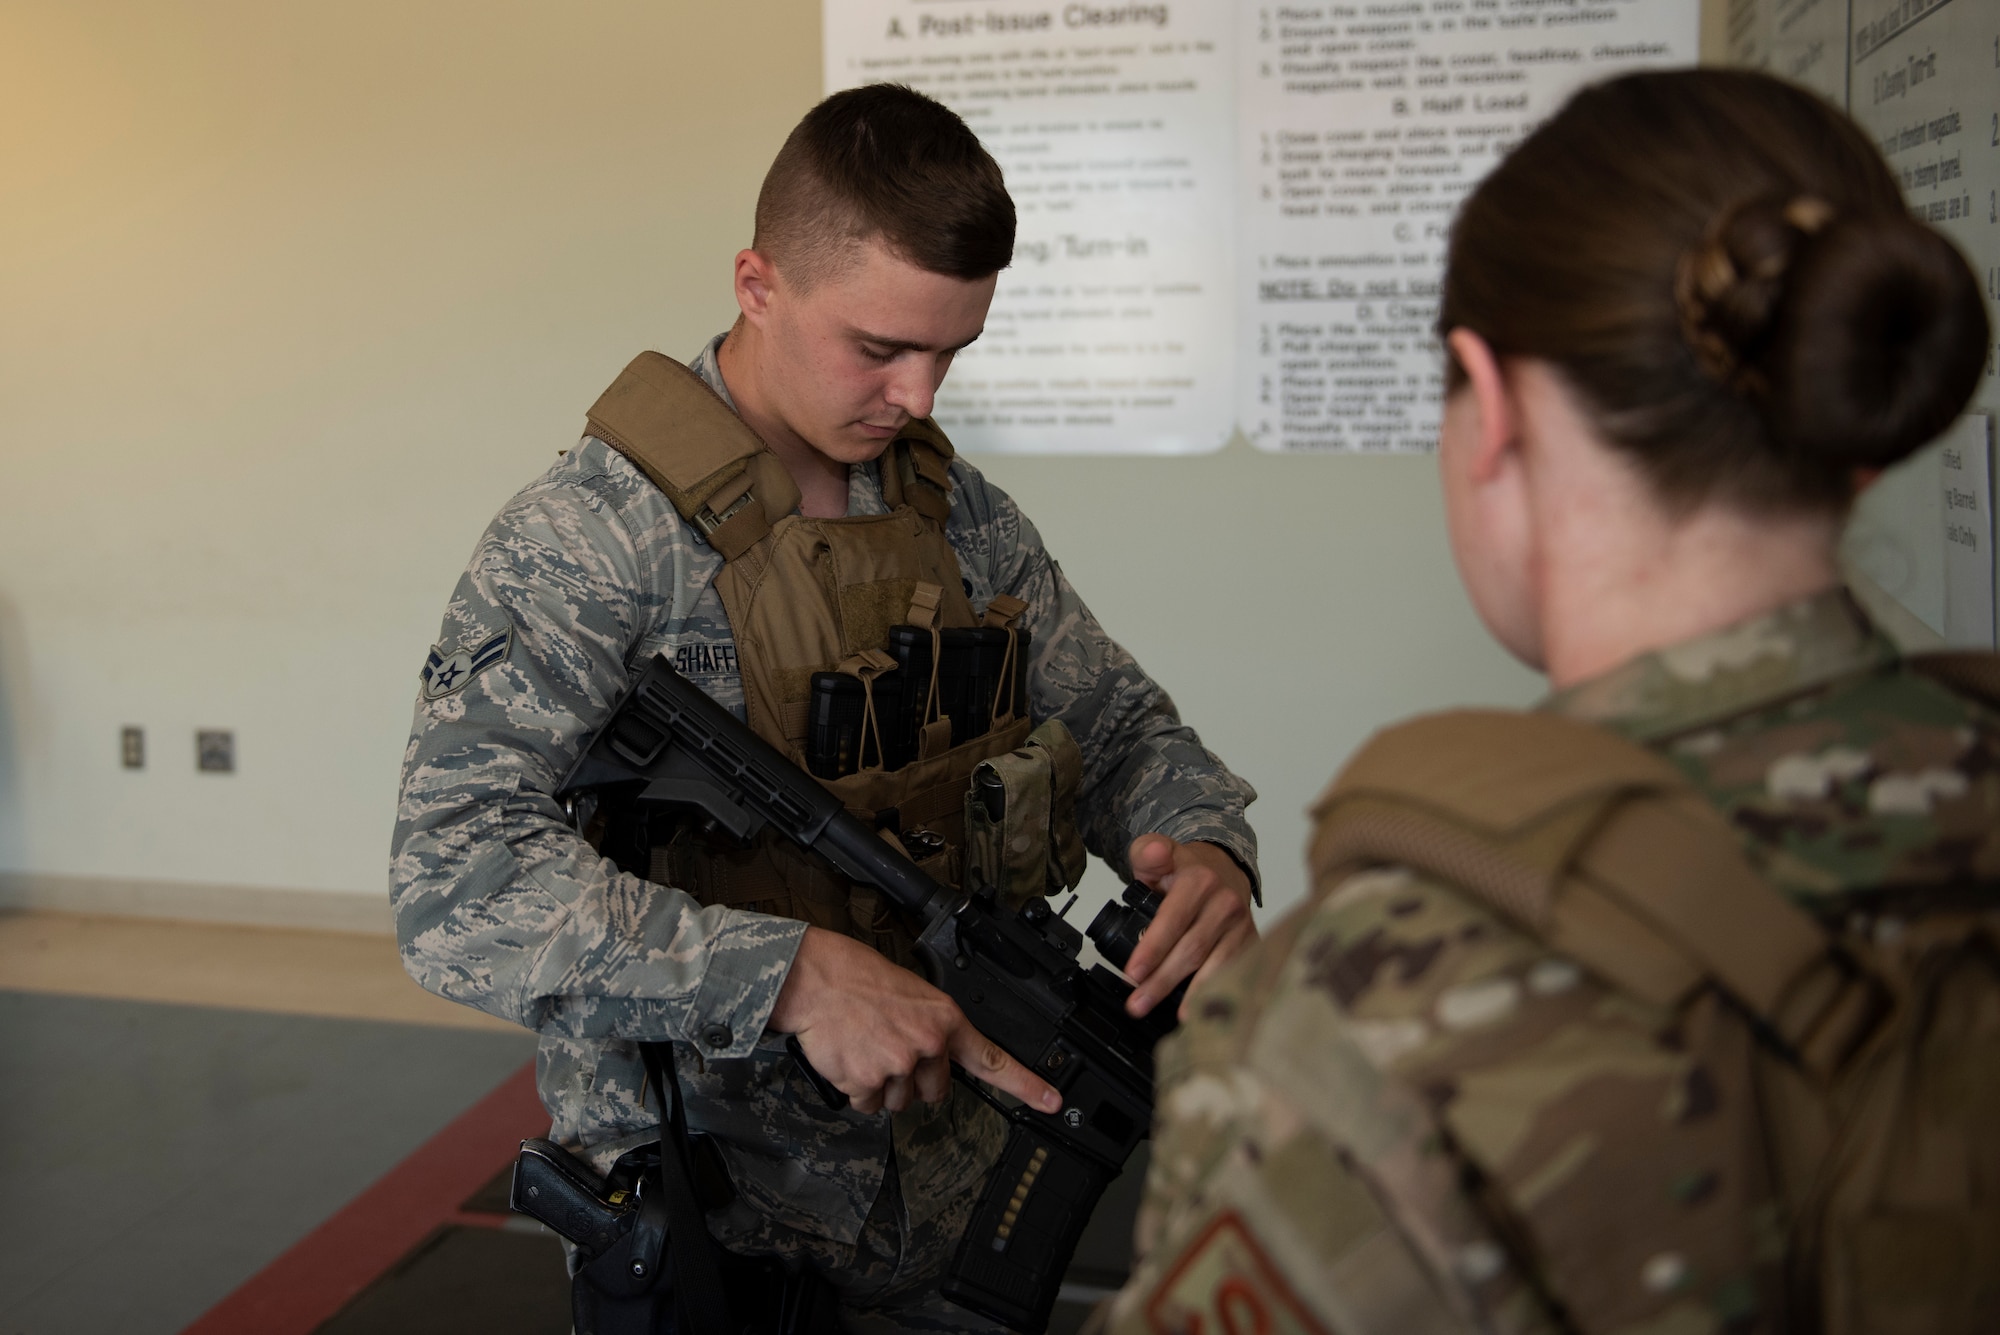 U.S. Air Force Airman 1st Class Christopher Shaffer, 60th Security Forces Squadron installation patrolman, clears his M4 rifle June 18, 2019, at Travis Air Force Base, California. Security Forces Airmen like Shaffer are responsible for protecting resources and personnel for the Air Force’s largest air mobility wing. (U.S. Air Force photo by Tech. Sgt. James Hodgman)